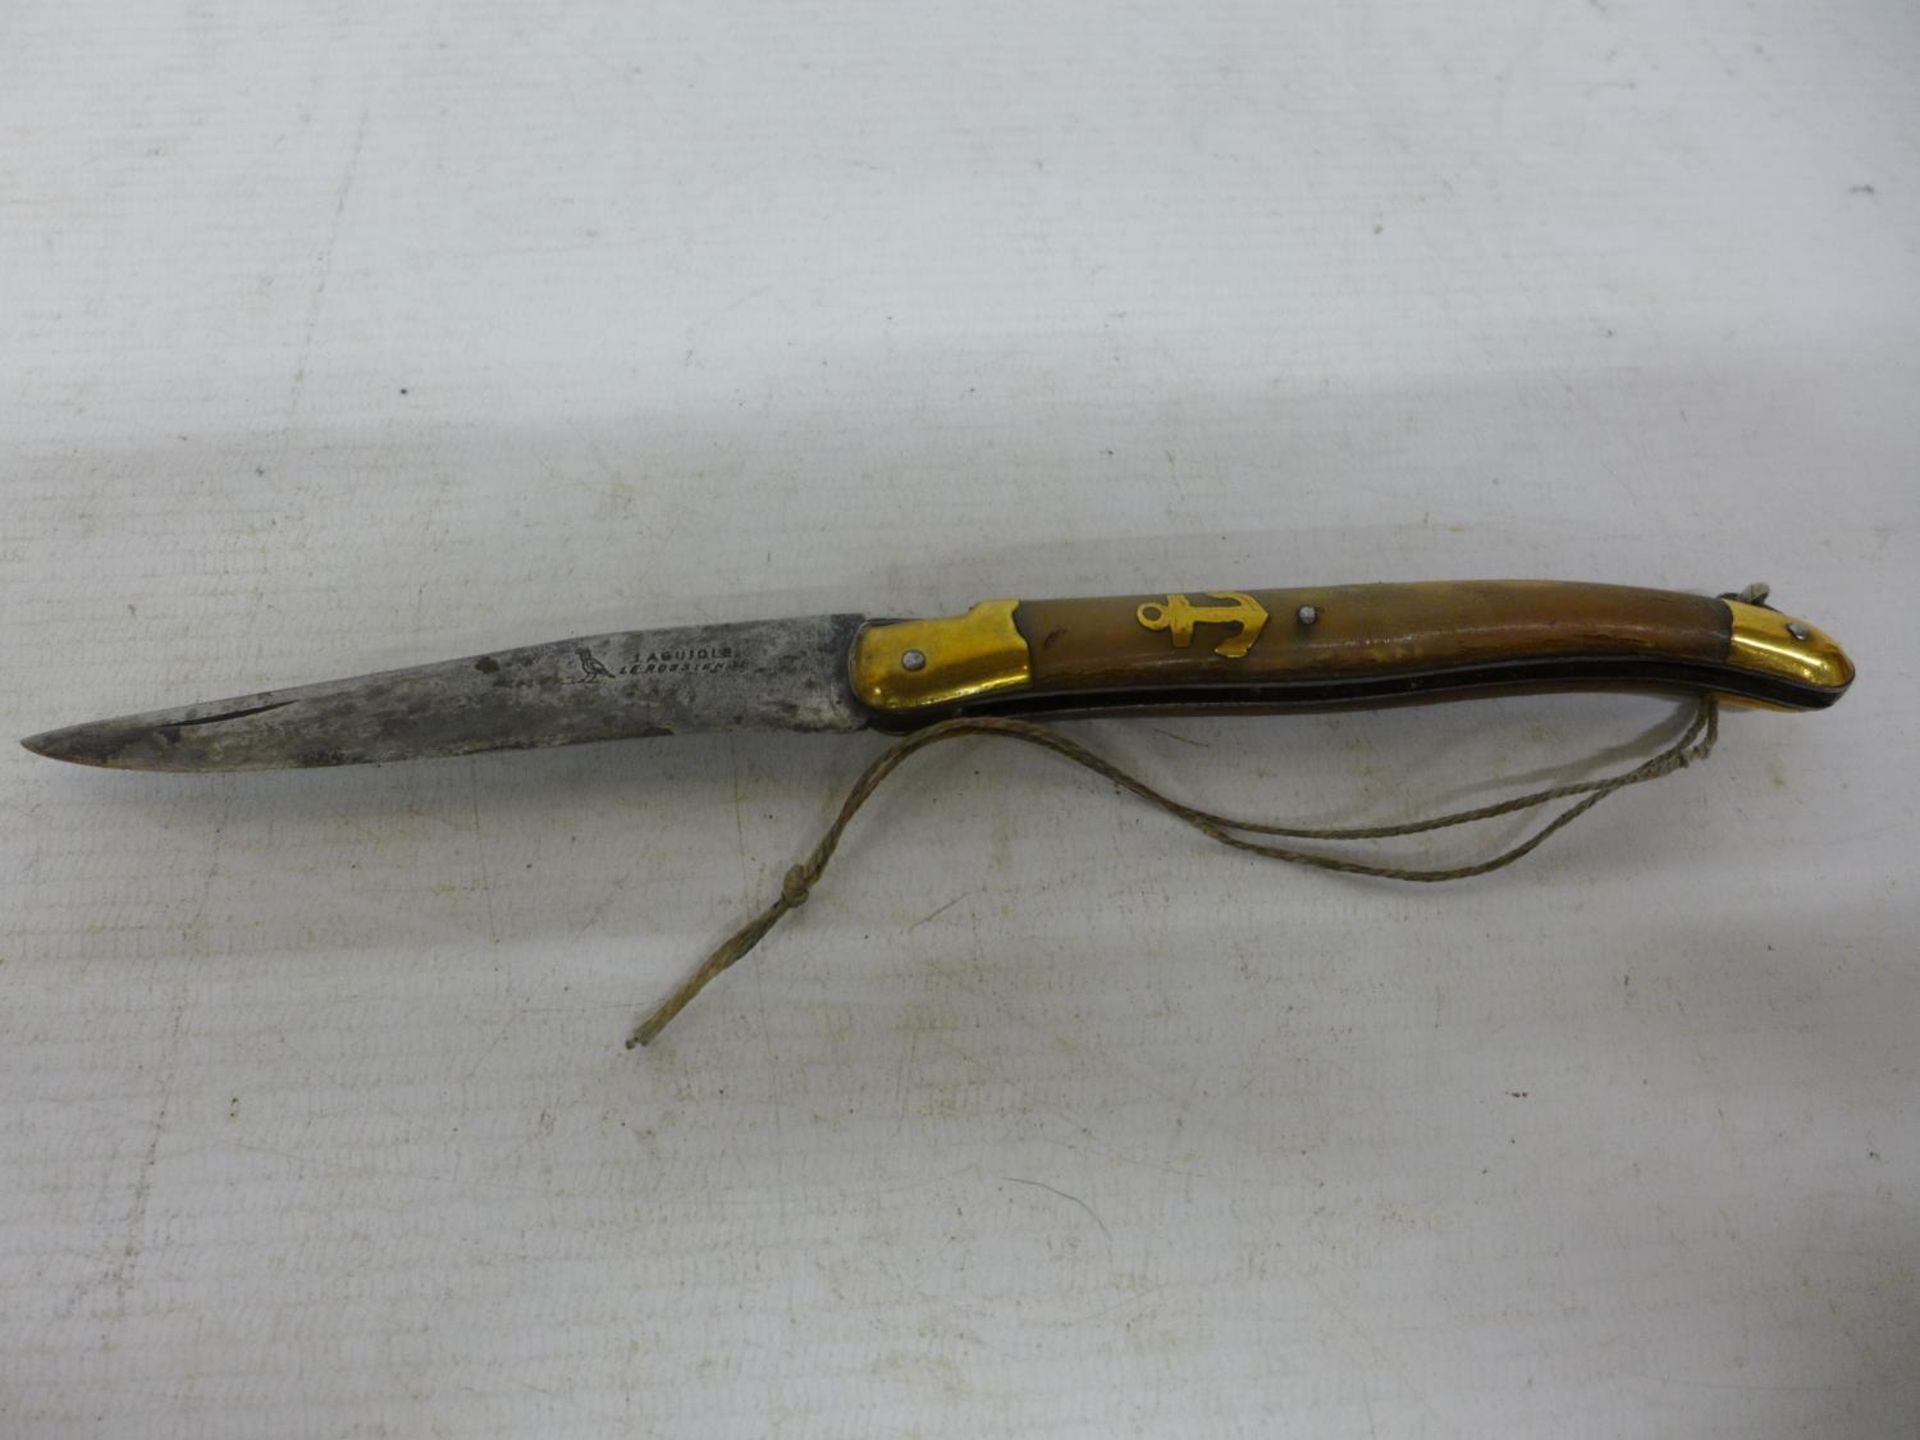 A LAGUIOLE ROSSIGNOL POCKET KNIFE CIRCA 1880 WITH GOLD INLAY - Image 3 of 3